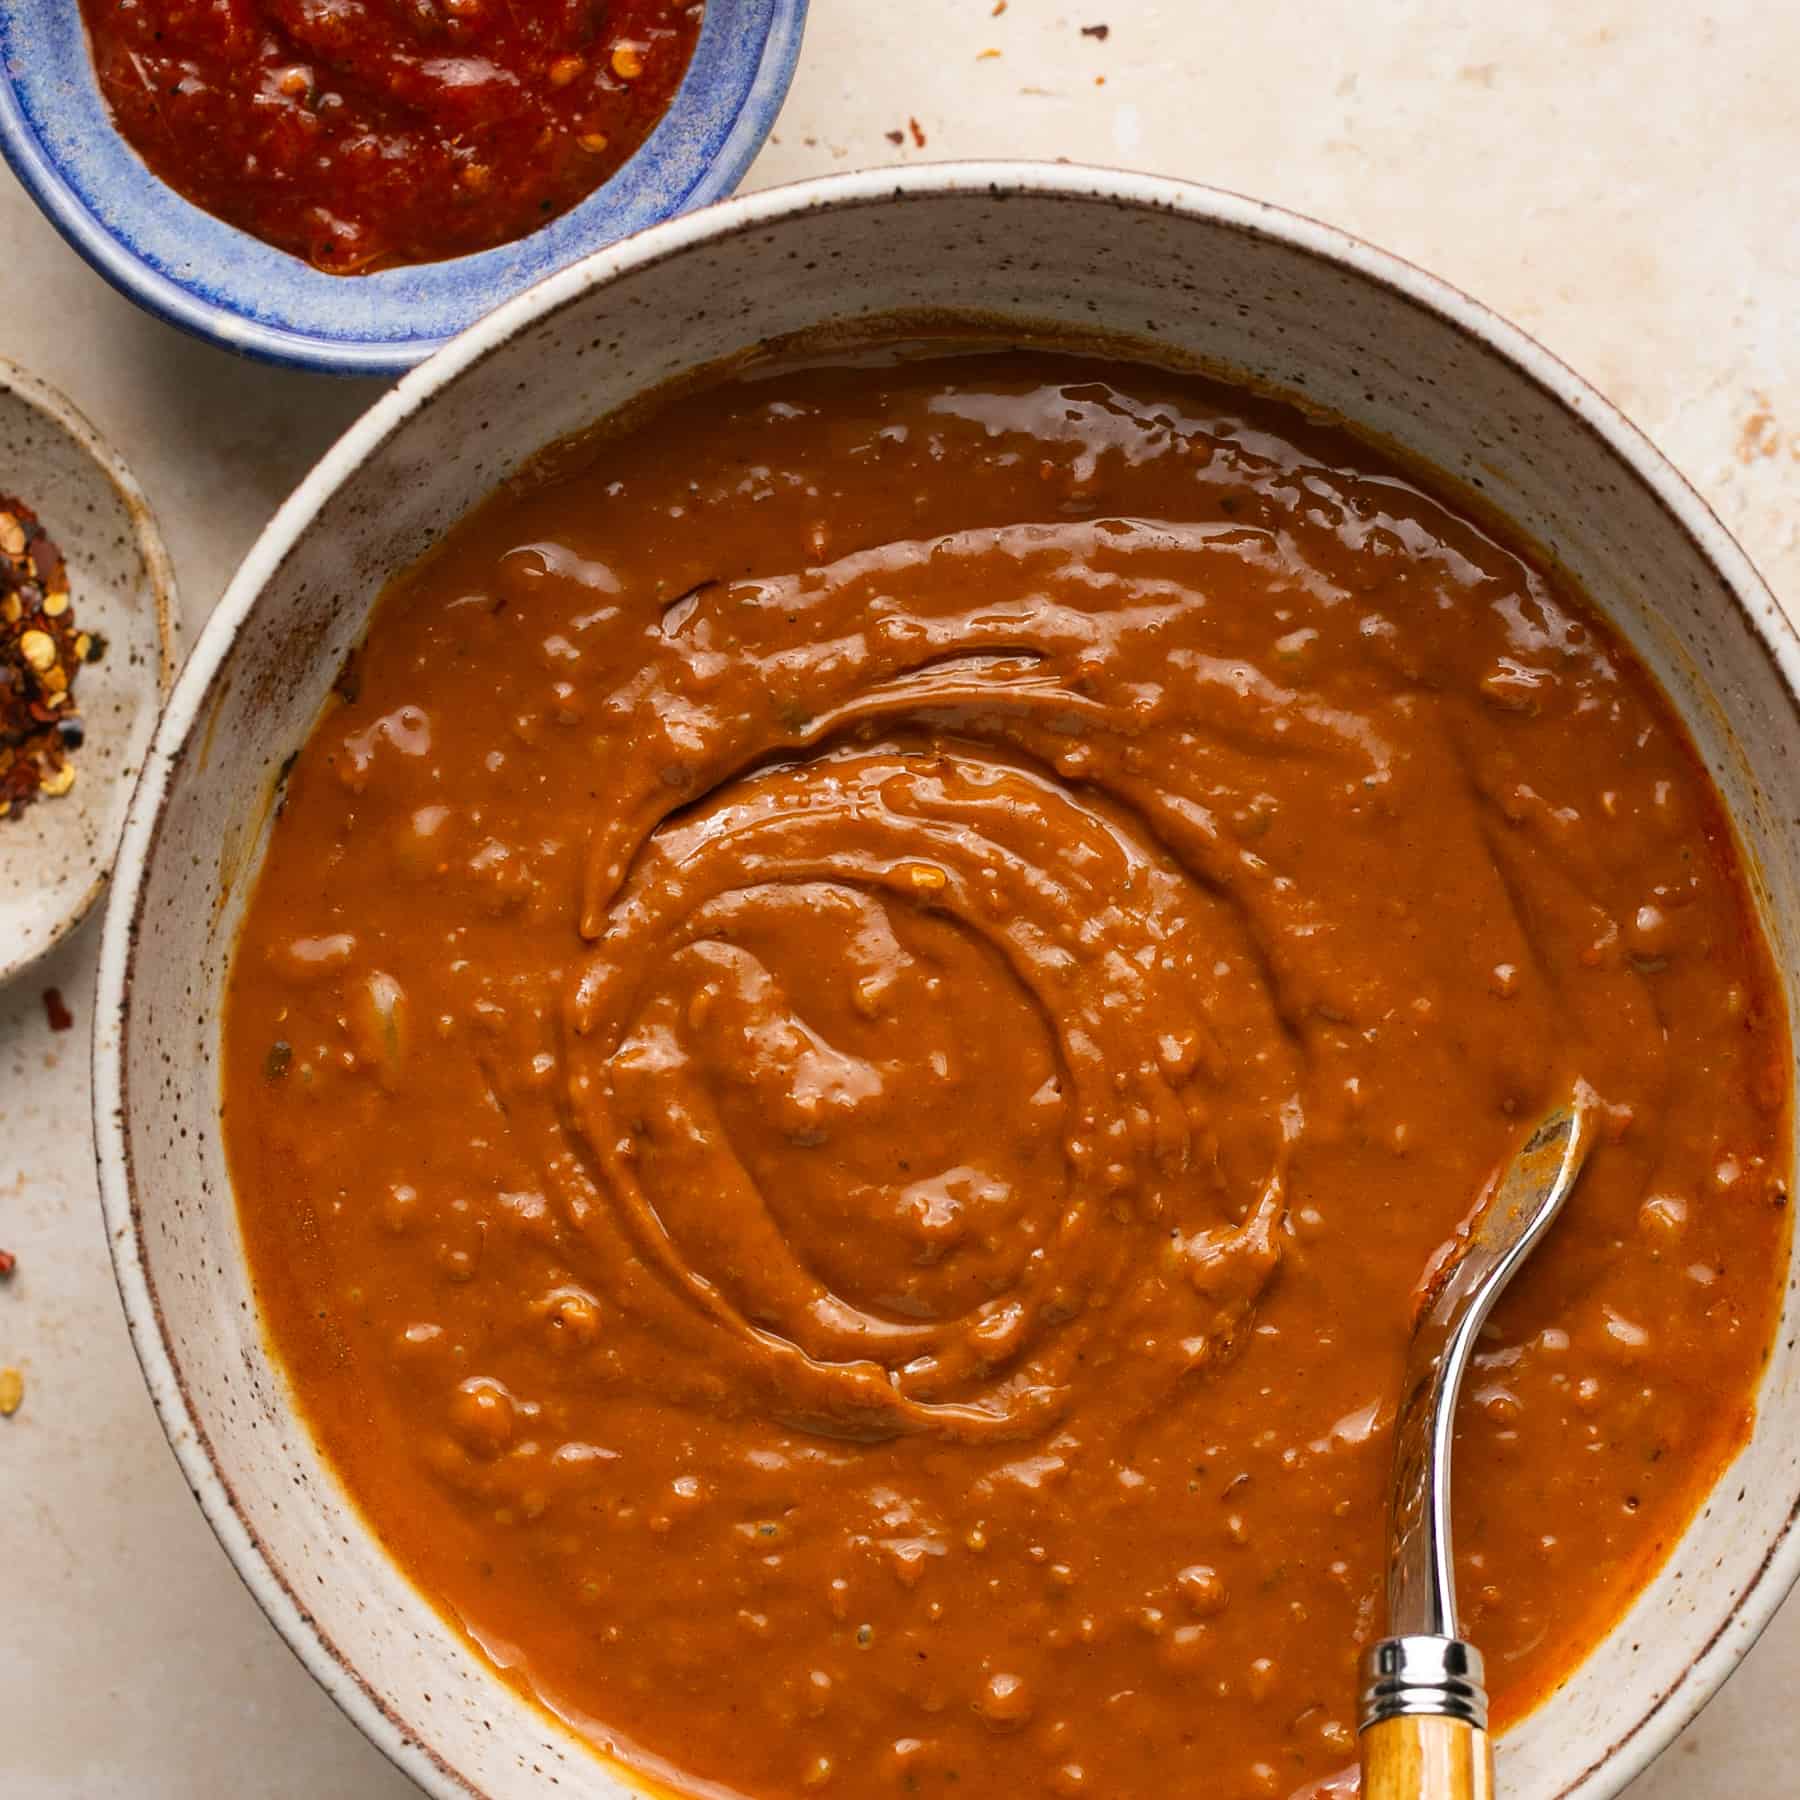 Homemade Lower Calorie Peanut Sauce (made with PB2)